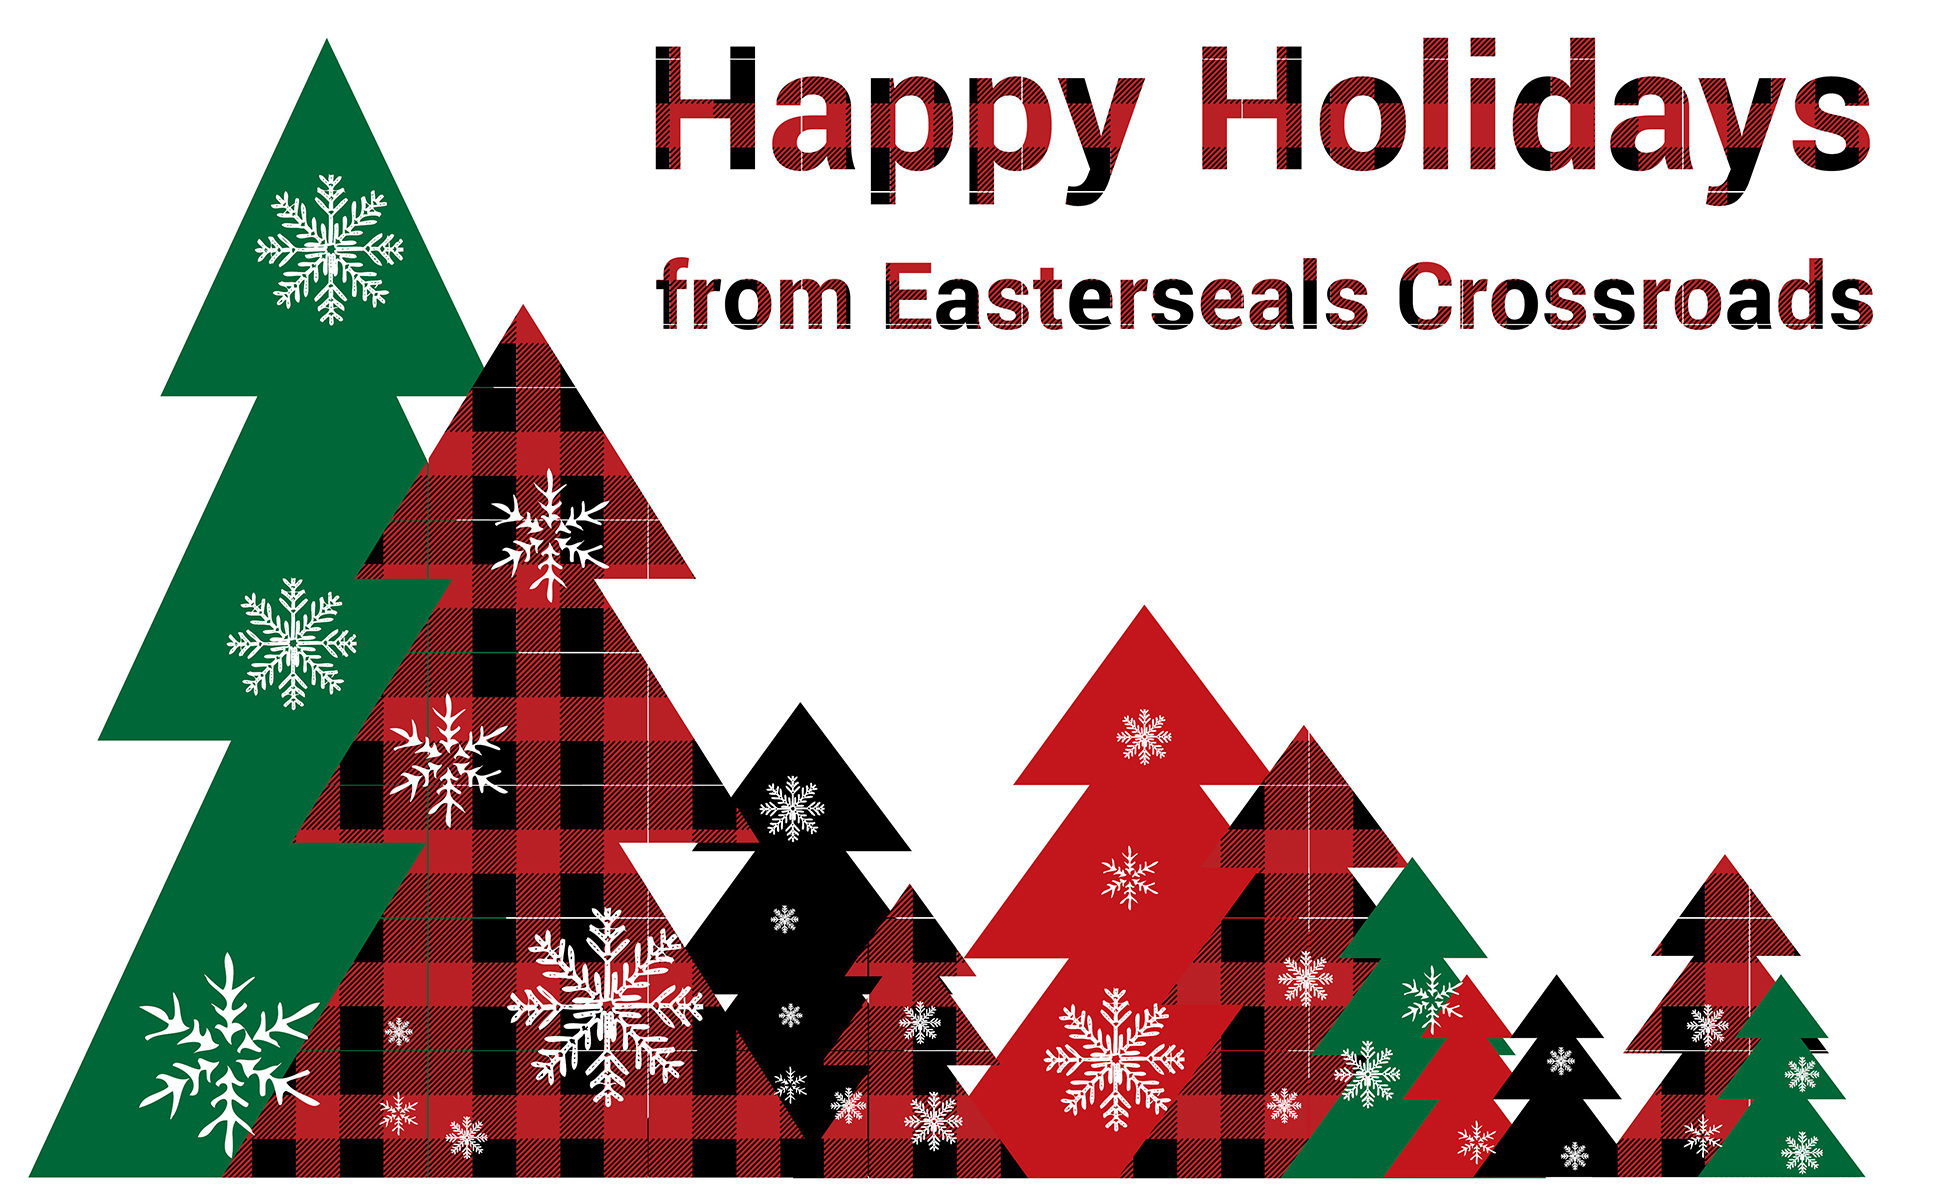 image of trees with words Happy Holidays from Easterseals Crossroads